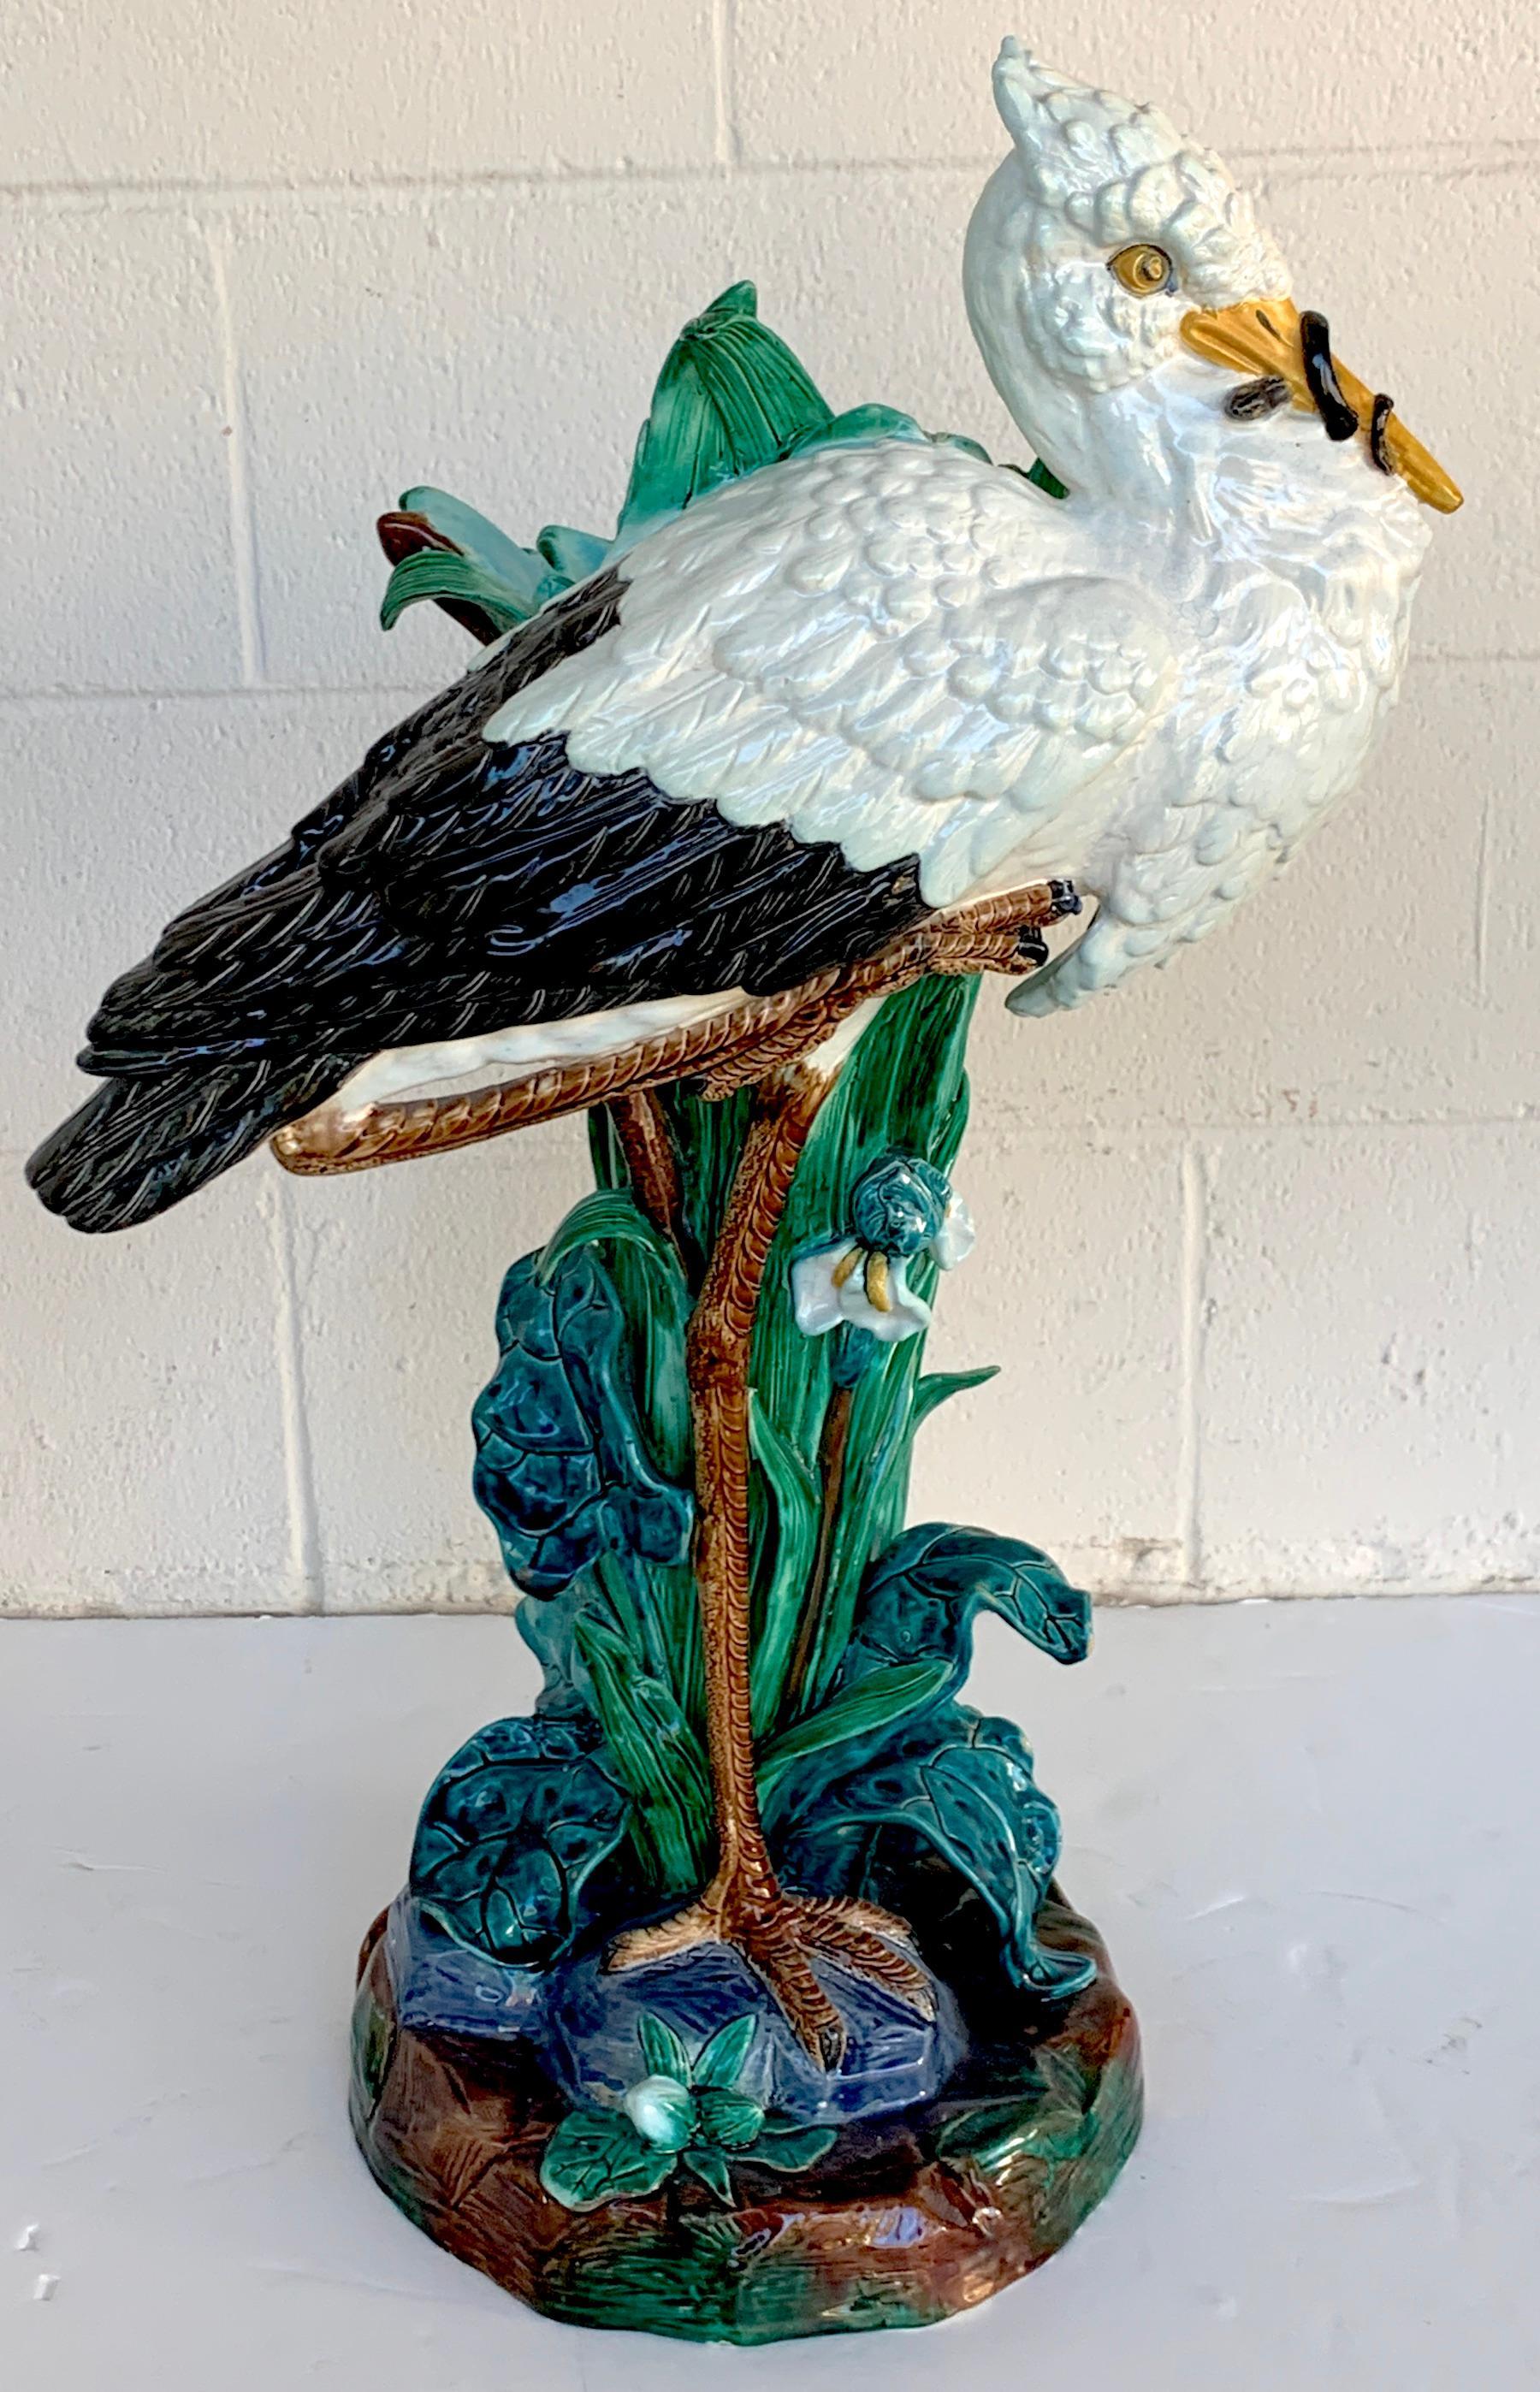 19th century English Majolica stork floor vase by Joseph Holdcroft, a fine and large example of the iconic naturalistic floor vase. Stamped 'Holdcroft' on the 11-inch diameter base.